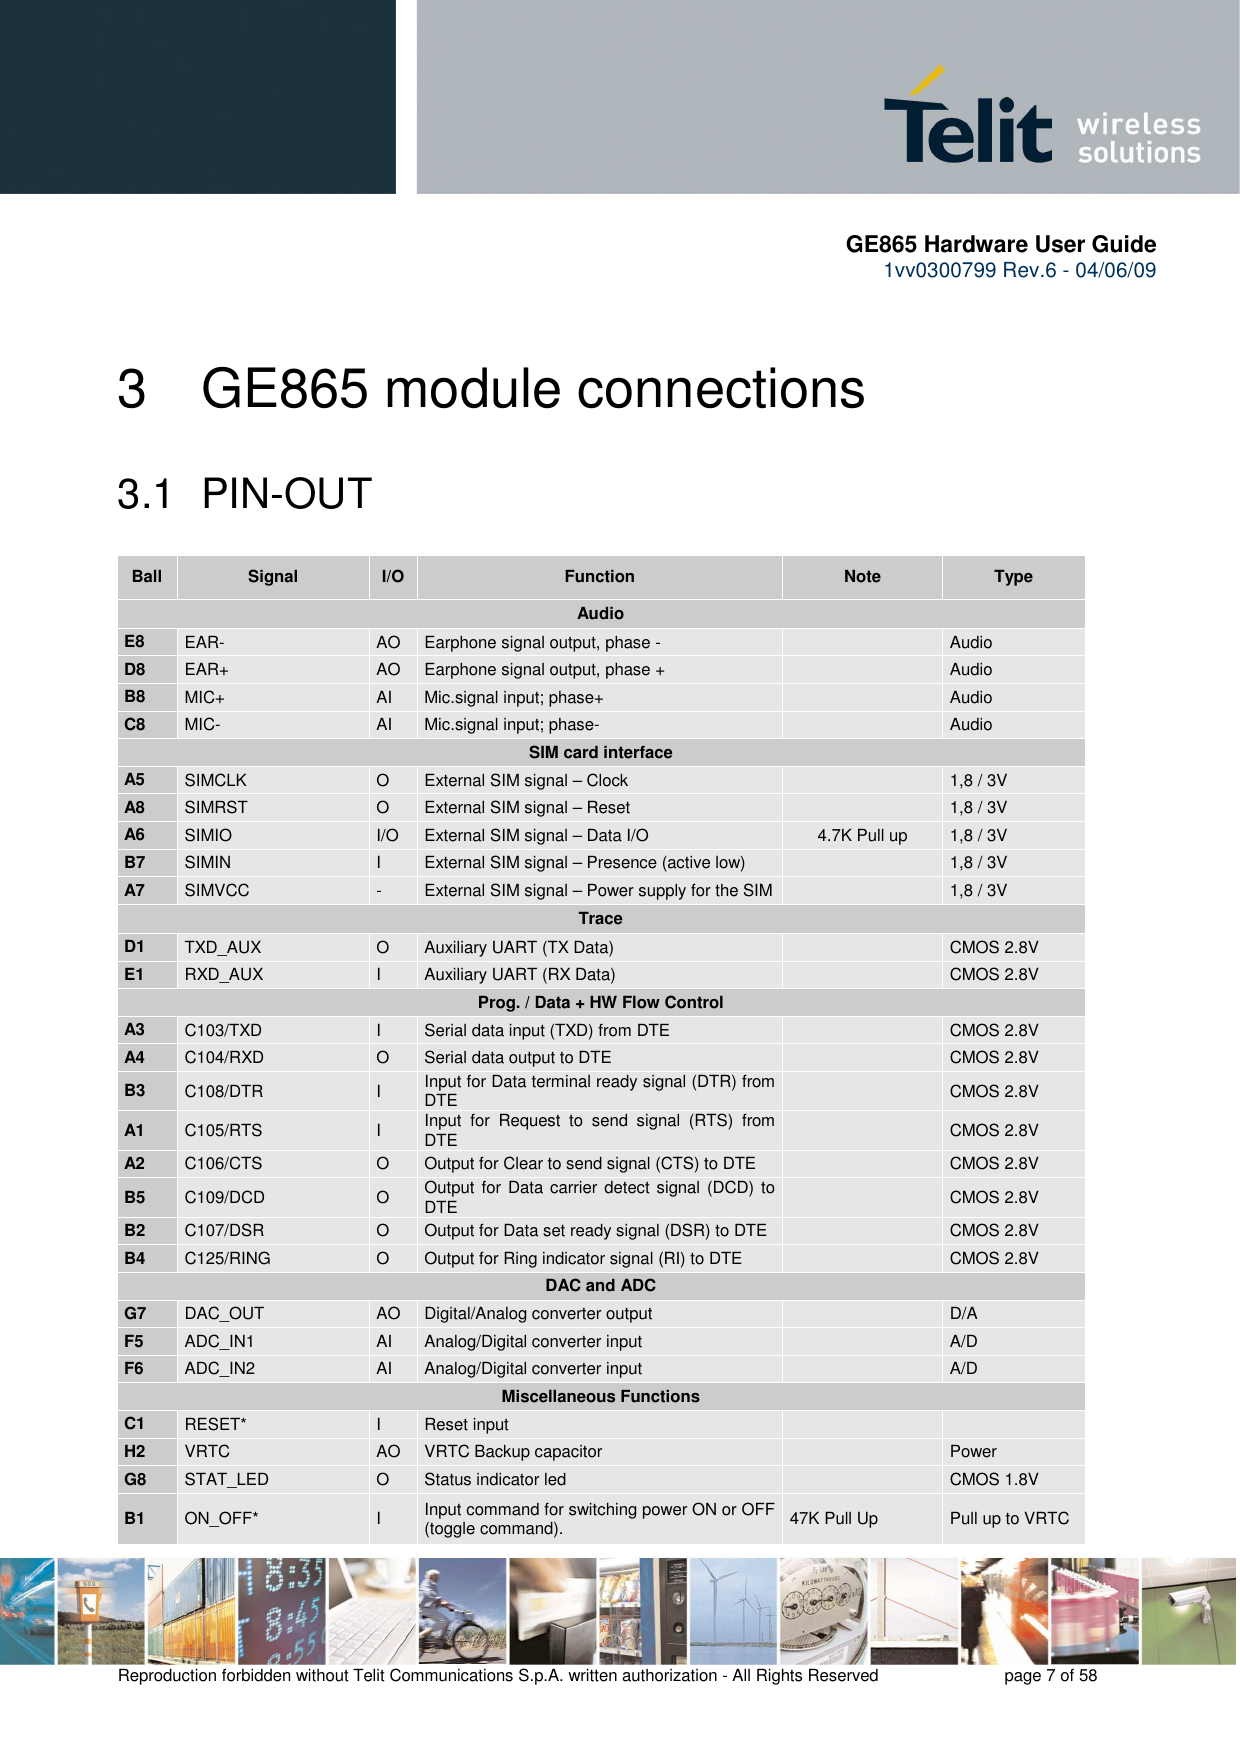       GE865 Hardware User Guide 1vv0300799 Rev.6 - 04/06/09      Reproduction forbidden without Telit Communications S.p.A. written authorization - All Rights Reserved    page 7 of 58  3  GE865 module connections  3.1  PIN-OUT Ball  Signal  I/O  Function  Note  Type Audio E8  EAR-  AO  Earphone signal output, phase -     Audio D8  EAR+  AO  Earphone signal output, phase +     Audio B8  MIC+  AI  Mic.signal input; phase+     Audio C8  MIC-  AI  Mic.signal input; phase-     Audio SIM card interface A5  SIMCLK  O  External SIM signal – Clock     1,8 / 3V A8  SIMRST  O  External SIM signal – Reset     1,8 / 3V A6  SIMIO  I/O  External SIM signal – Data I/O  4.7K Pull up  1,8 / 3V B7  SIMIN  I  External SIM signal – Presence (active low)    1,8 / 3V A7  SIMVCC  -  External SIM signal – Power supply for the SIM     1,8 / 3V Trace D1  TXD_AUX  O  Auxiliary UART (TX Data)     CMOS 2.8V E1  RXD_AUX  I  Auxiliary UART (RX Data)      CMOS 2.8V Prog. / Data + HW Flow Control A3  C103/TXD  I  Serial data input (TXD) from DTE      CMOS 2.8V A4  C104/RXD  O  Serial data output to DTE      CMOS 2.8V B3  C108/DTR  I  Input for Data terminal ready signal (DTR) from DTE       CMOS 2.8V A1  C105/RTS  I  Input  for  Request  to  send  signal  (RTS)  from DTE      CMOS 2.8V A2  C106/CTS  O  Output for Clear to send signal (CTS) to DTE      CMOS 2.8V B5  C109/DCD  O  Output for  Data carrier detect signal (DCD) to DTE      CMOS 2.8V B2  C107/DSR  O  Output for Data set ready signal (DSR) to DTE     CMOS 2.8V B4  C125/RING  O  Output for Ring indicator signal (RI) to DTE      CMOS 2.8V DAC and ADC G7  DAC_OUT  AO  Digital/Analog converter output     D/A F5  ADC_IN1  AI  Analog/Digital converter input     A/D F6  ADC_IN2  AI  Analog/Digital converter input     A/D Miscellaneous Functions C1  RESET*  I  Reset input       H2  VRTC  AO  VRTC Backup capacitor     Power G8  STAT_LED  O  Status indicator led     CMOS 1.8V B1  ON_OFF*  I  Input command for switching power ON or OFF (toggle command).   47K Pull Up  Pull up to VRTC 